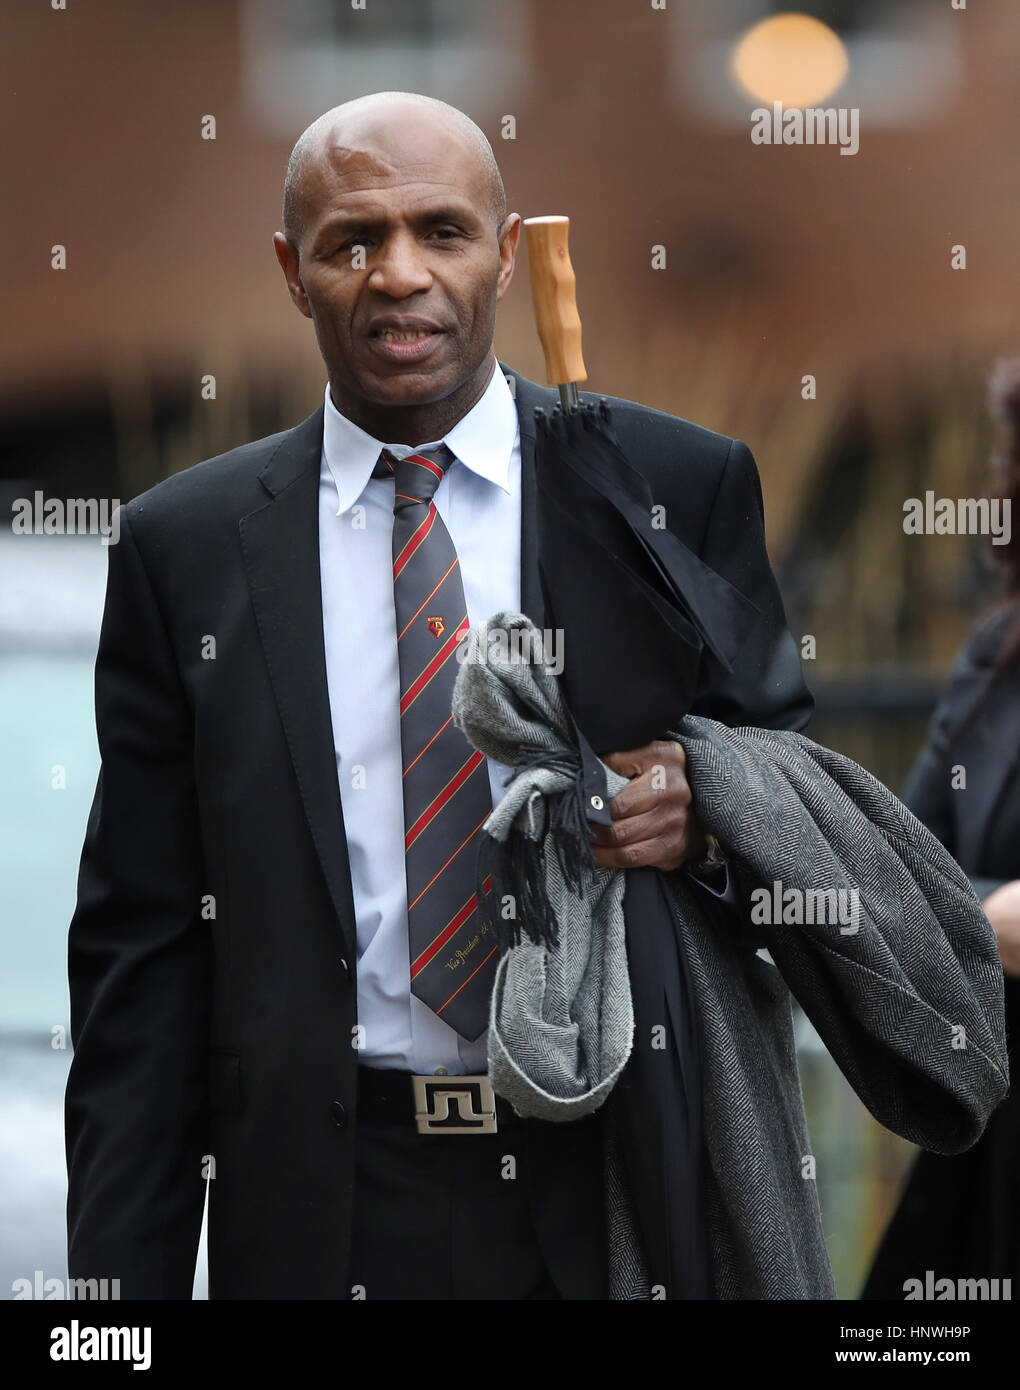 Luther Blissett former Watford player during the funeral service for Graham Taylor held at St Mary's Church, Watford. PRESS ASSOCIATION Photo. Picture date: Wednesday February 1, 2017. See PA story SOCCER Taylor. Photo credit should read: Nick Potts/PA Wire Stock Photo